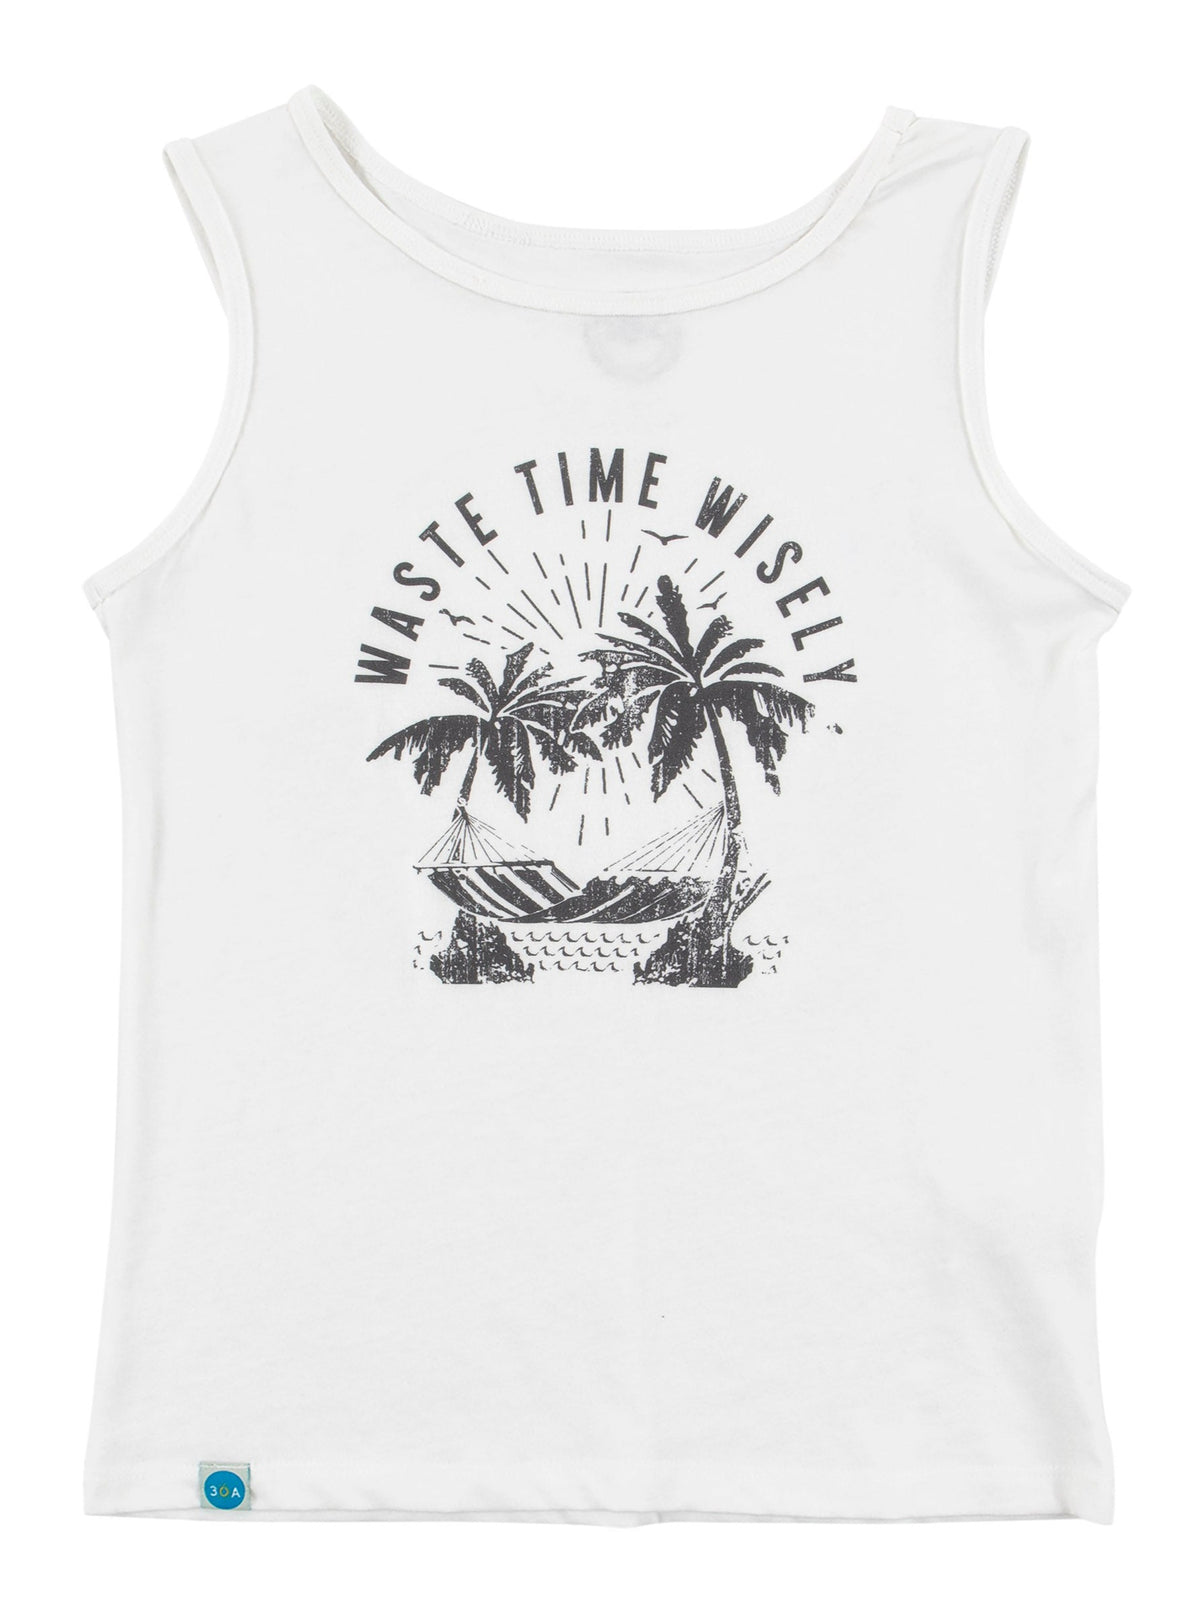 Waste Time Wisely Tank Top